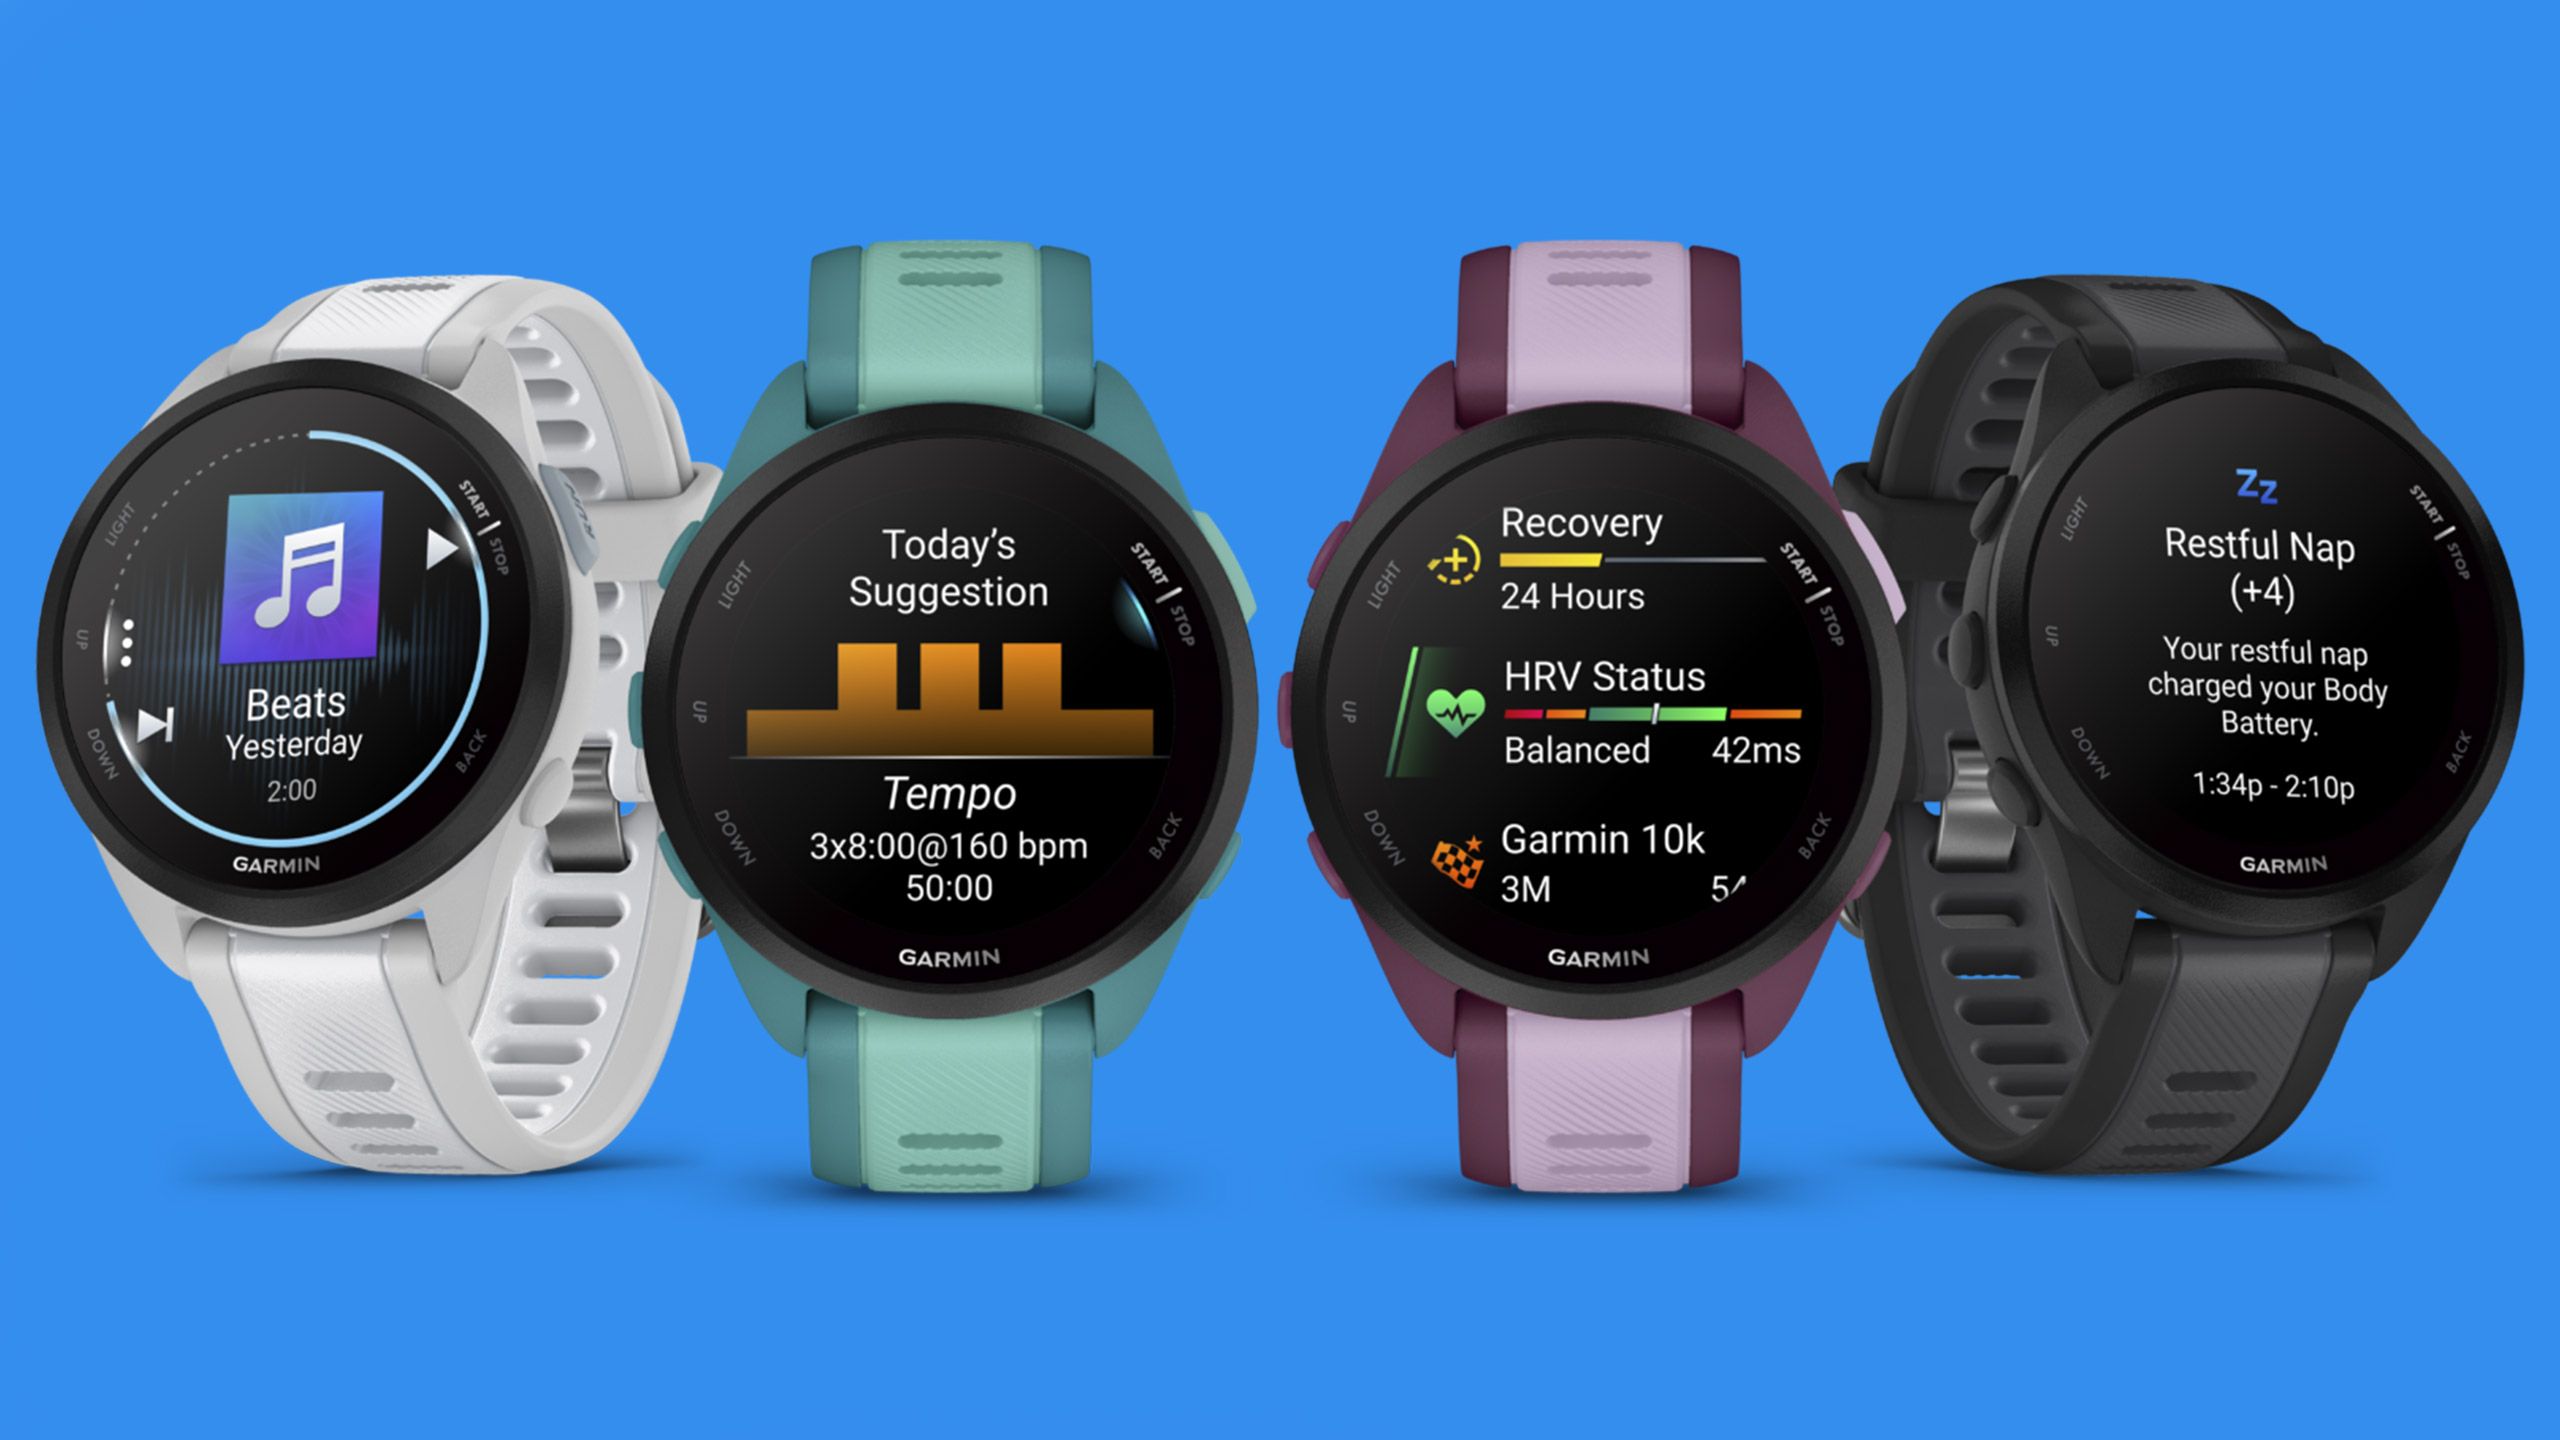 Garmin's new Forerunner 165 smartwatch comes in four different colors -- white, teal, purple and black.